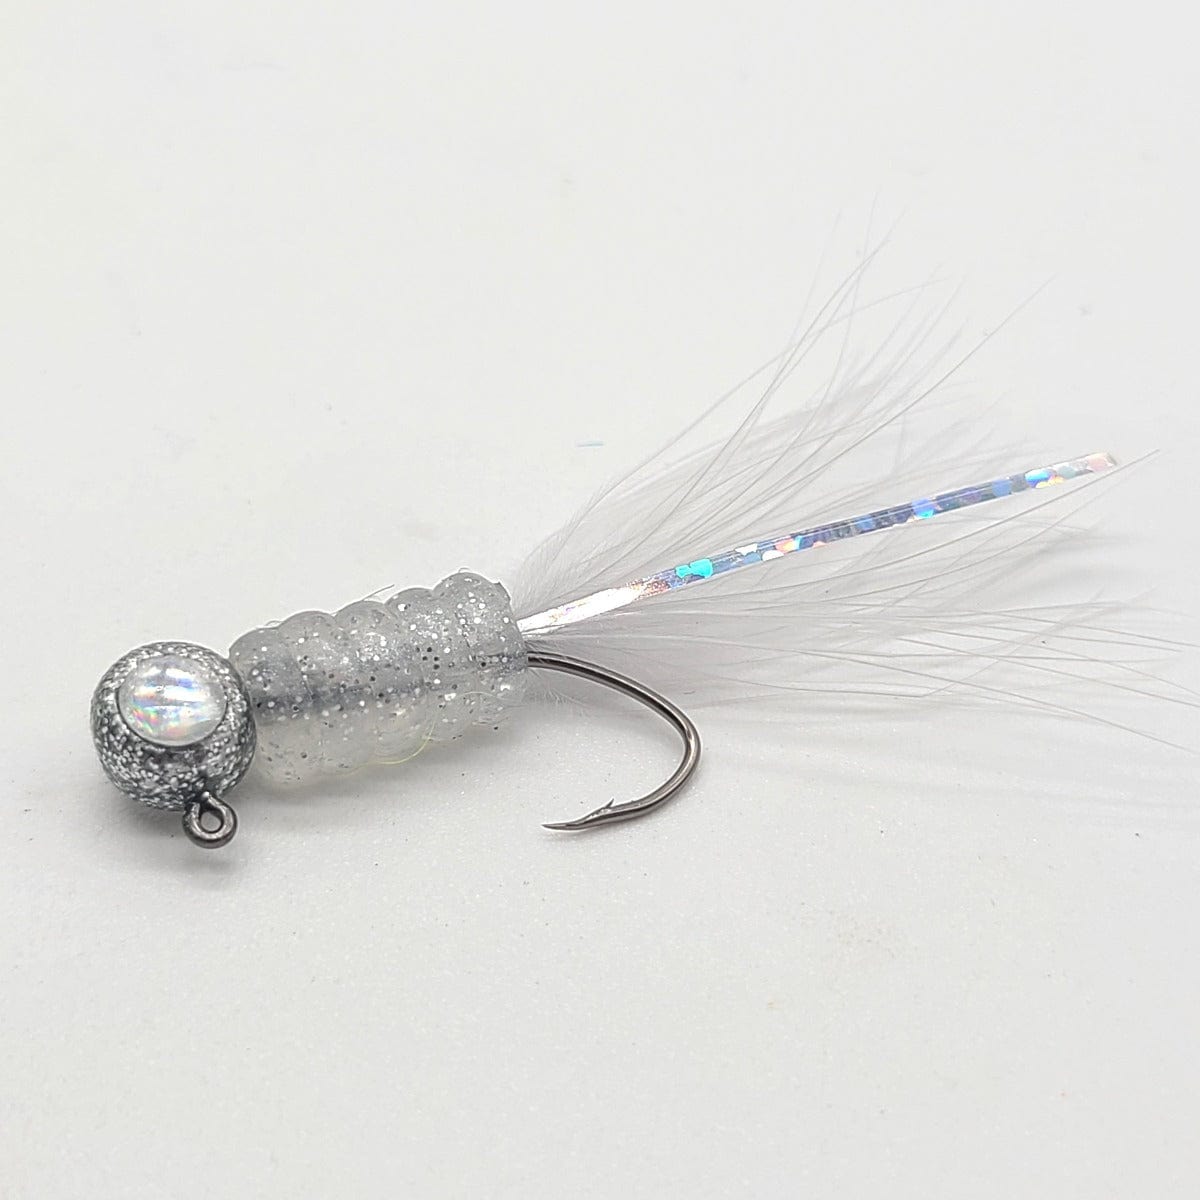 Hand tied Crappie jig, jelly belly jig with a pearl and silver flake colored soft plastic body and a gray marabou tail. The 3D eye Crappie jig head is custom painted with Disco Silver powder paint . This Crappie jig is Hand tied on a mustad sickle hook by Ramble tamble tackle.